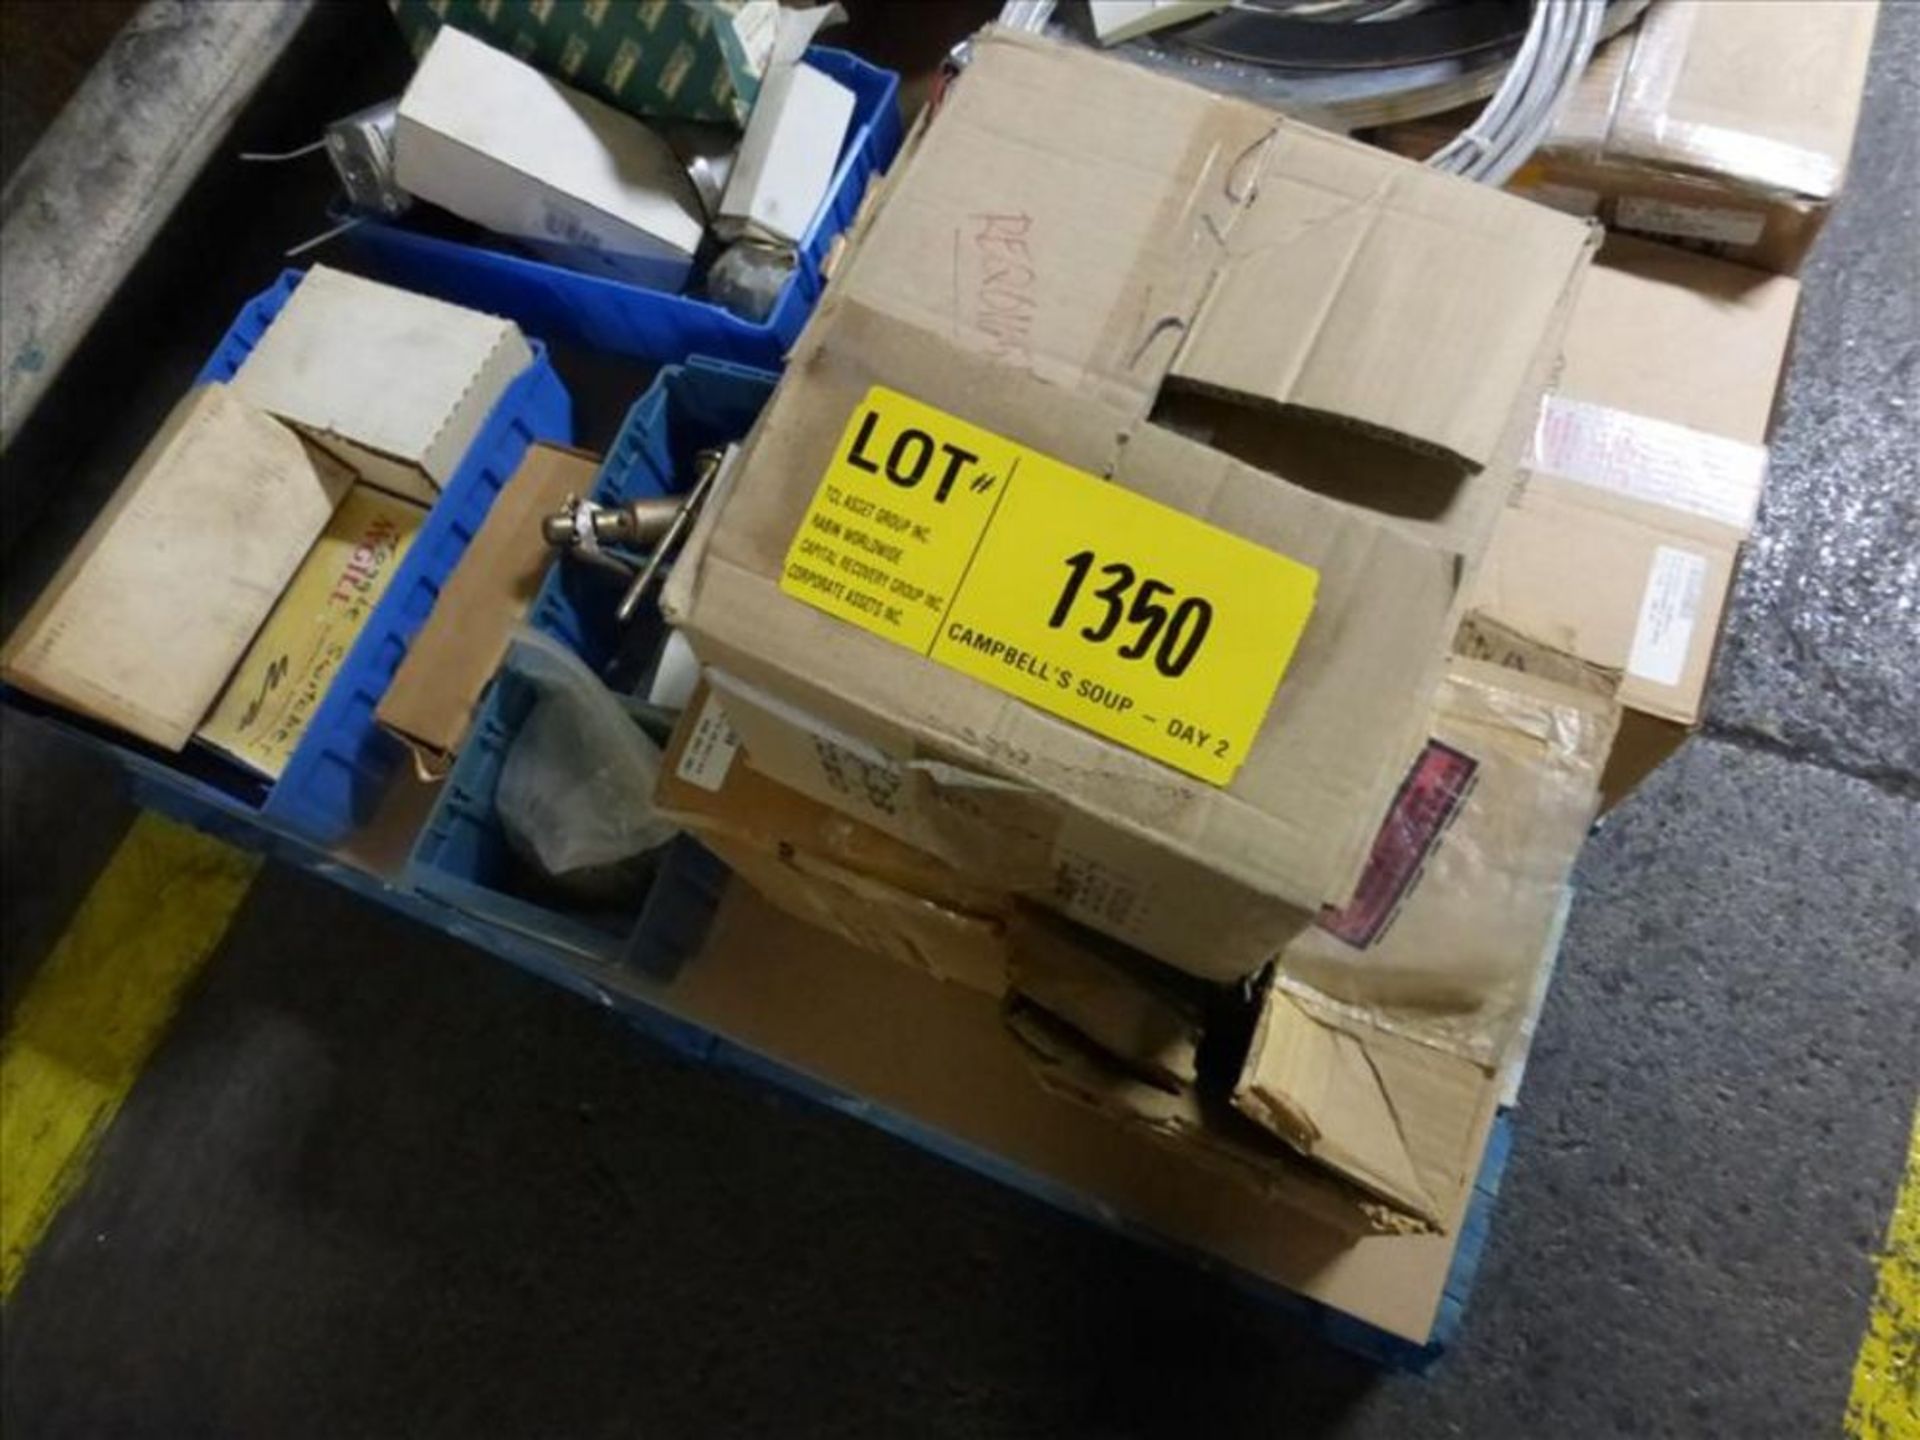 Lot of Boiler Parts: Valves, Transmitters, Electrical, Relief Valves (3 Pallets) [Across from 1st